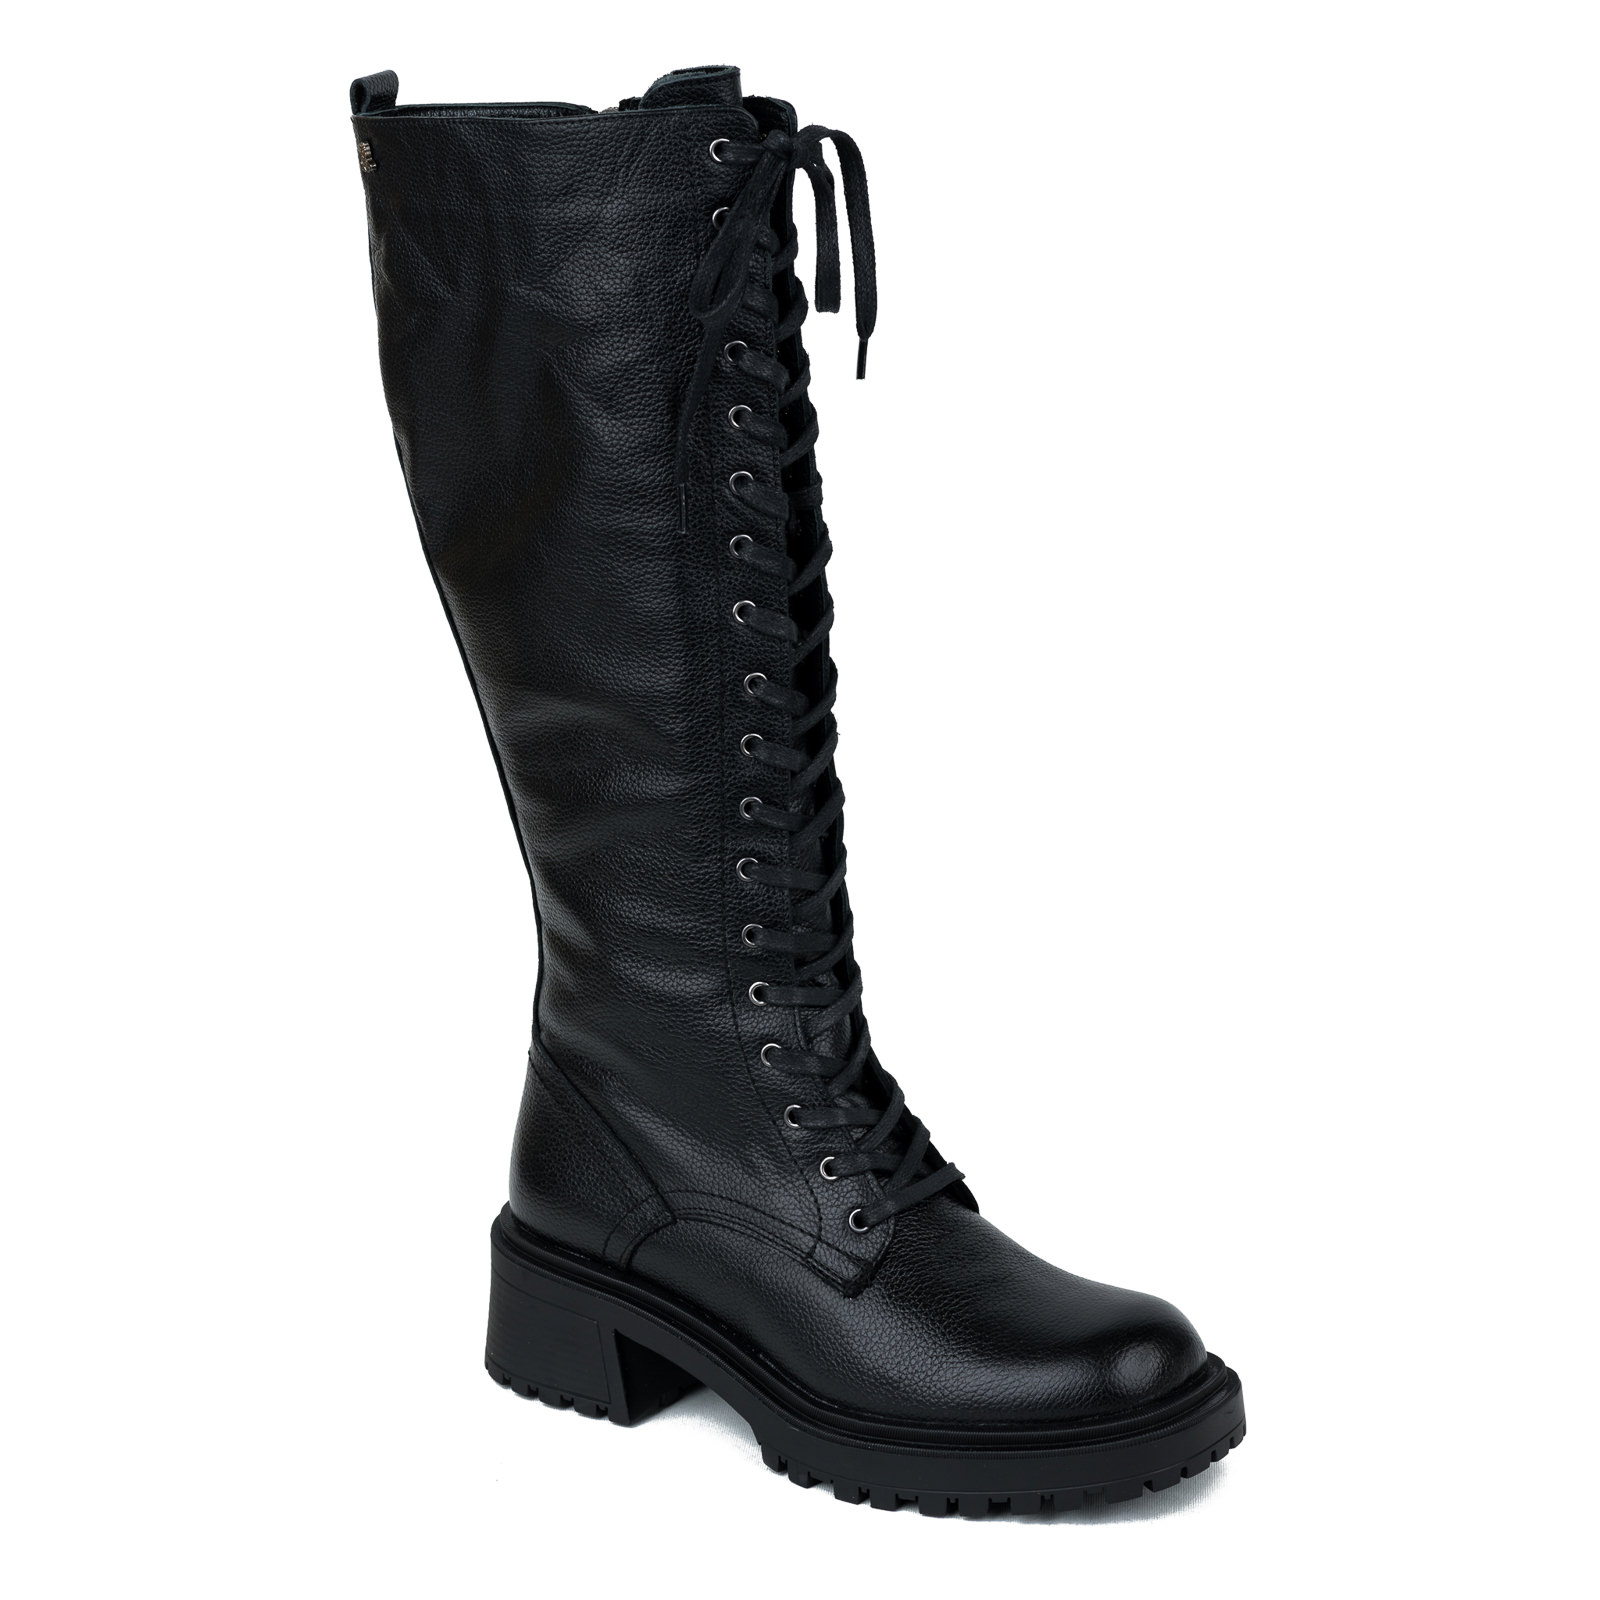 Leather boots B633 - BLACK